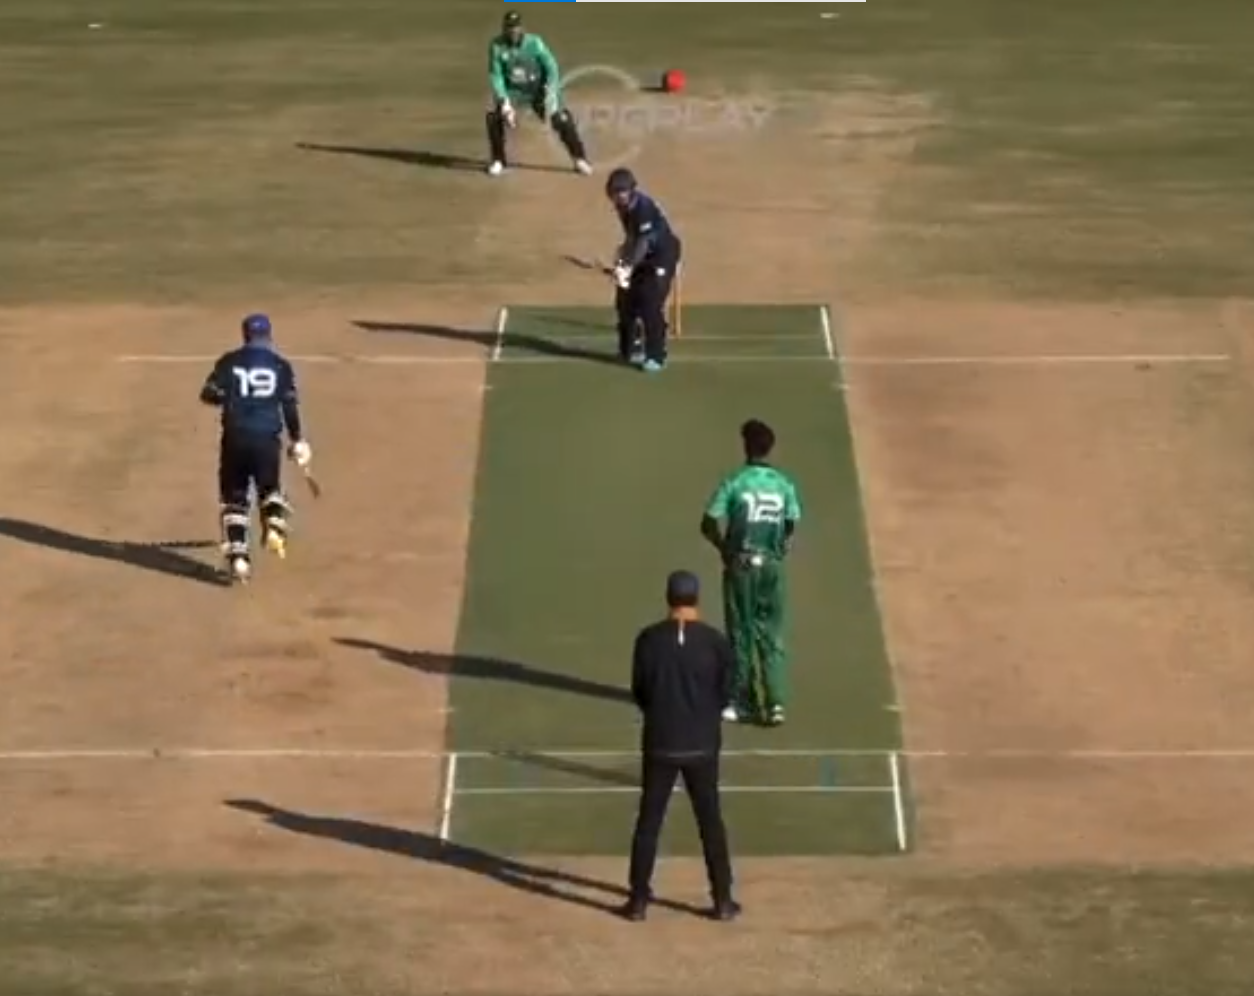 Twitter reacts as commentators laugh uncontrollably after non-striker sets off for run before ball is bowled 